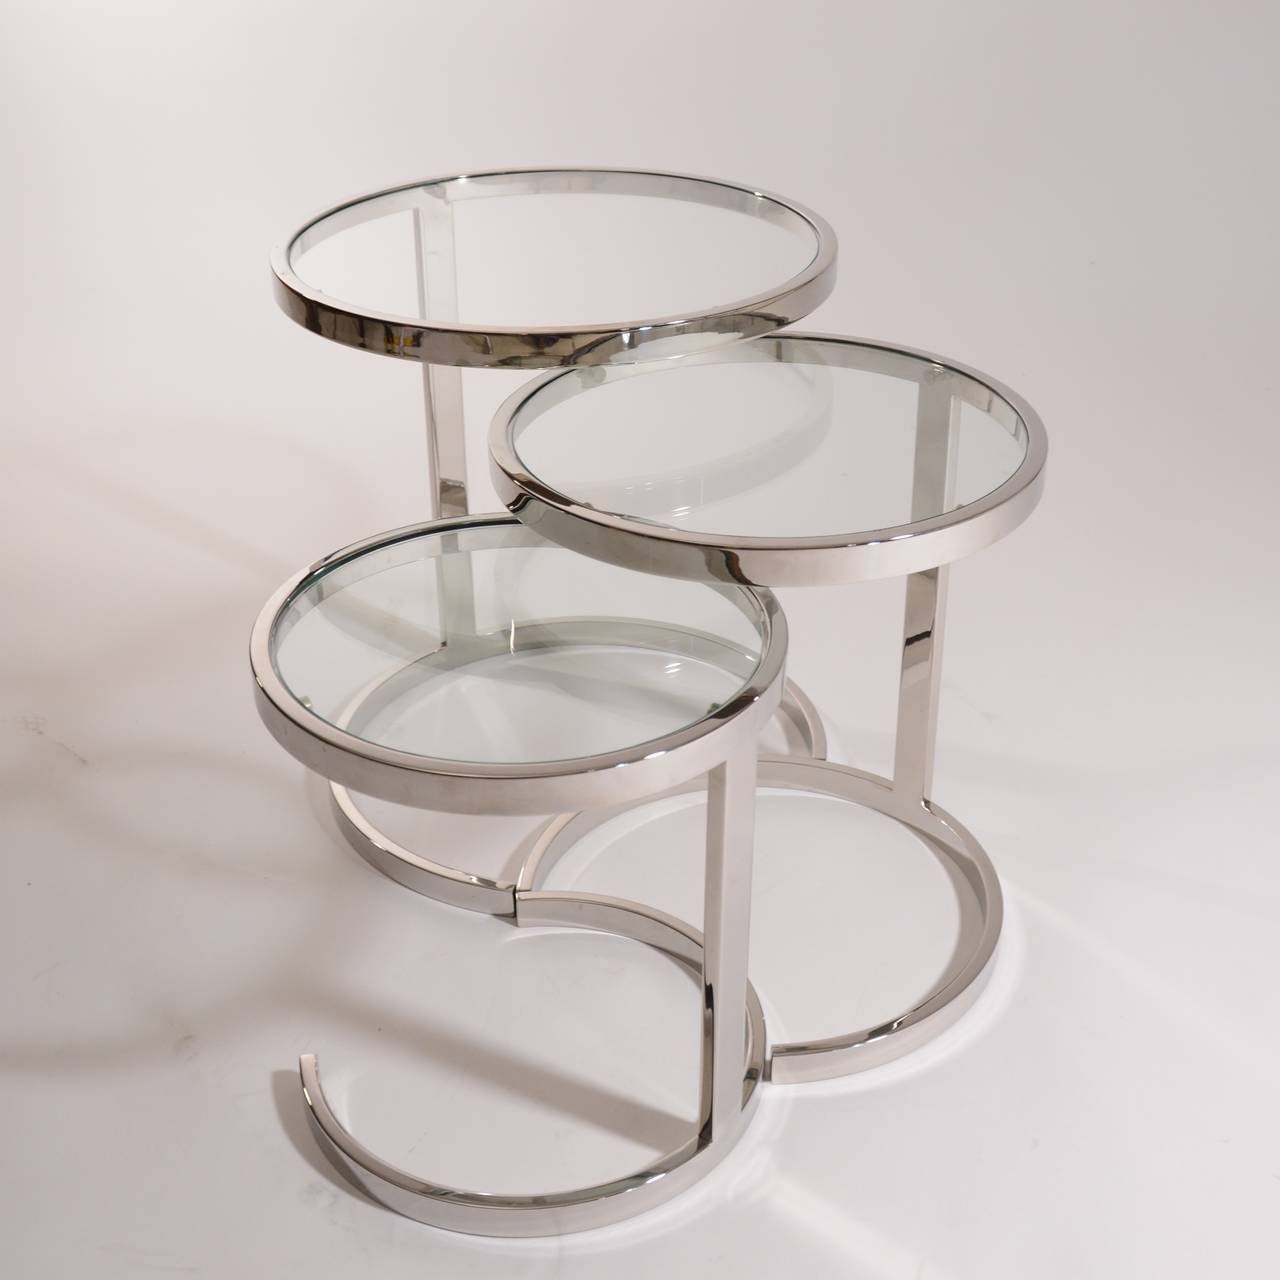 Late 20th Century Set of 3 Nesting Stainless Steel and Glass Nesting Tables by Brueton